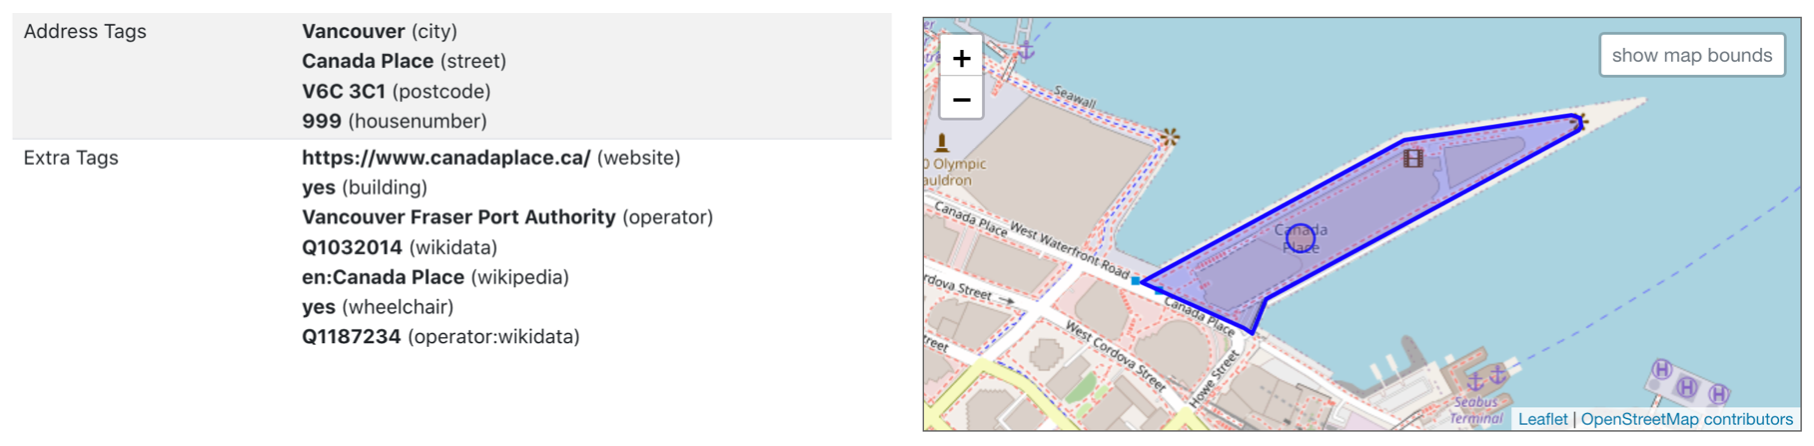 OSM tags used to describe nodes, ways and relations